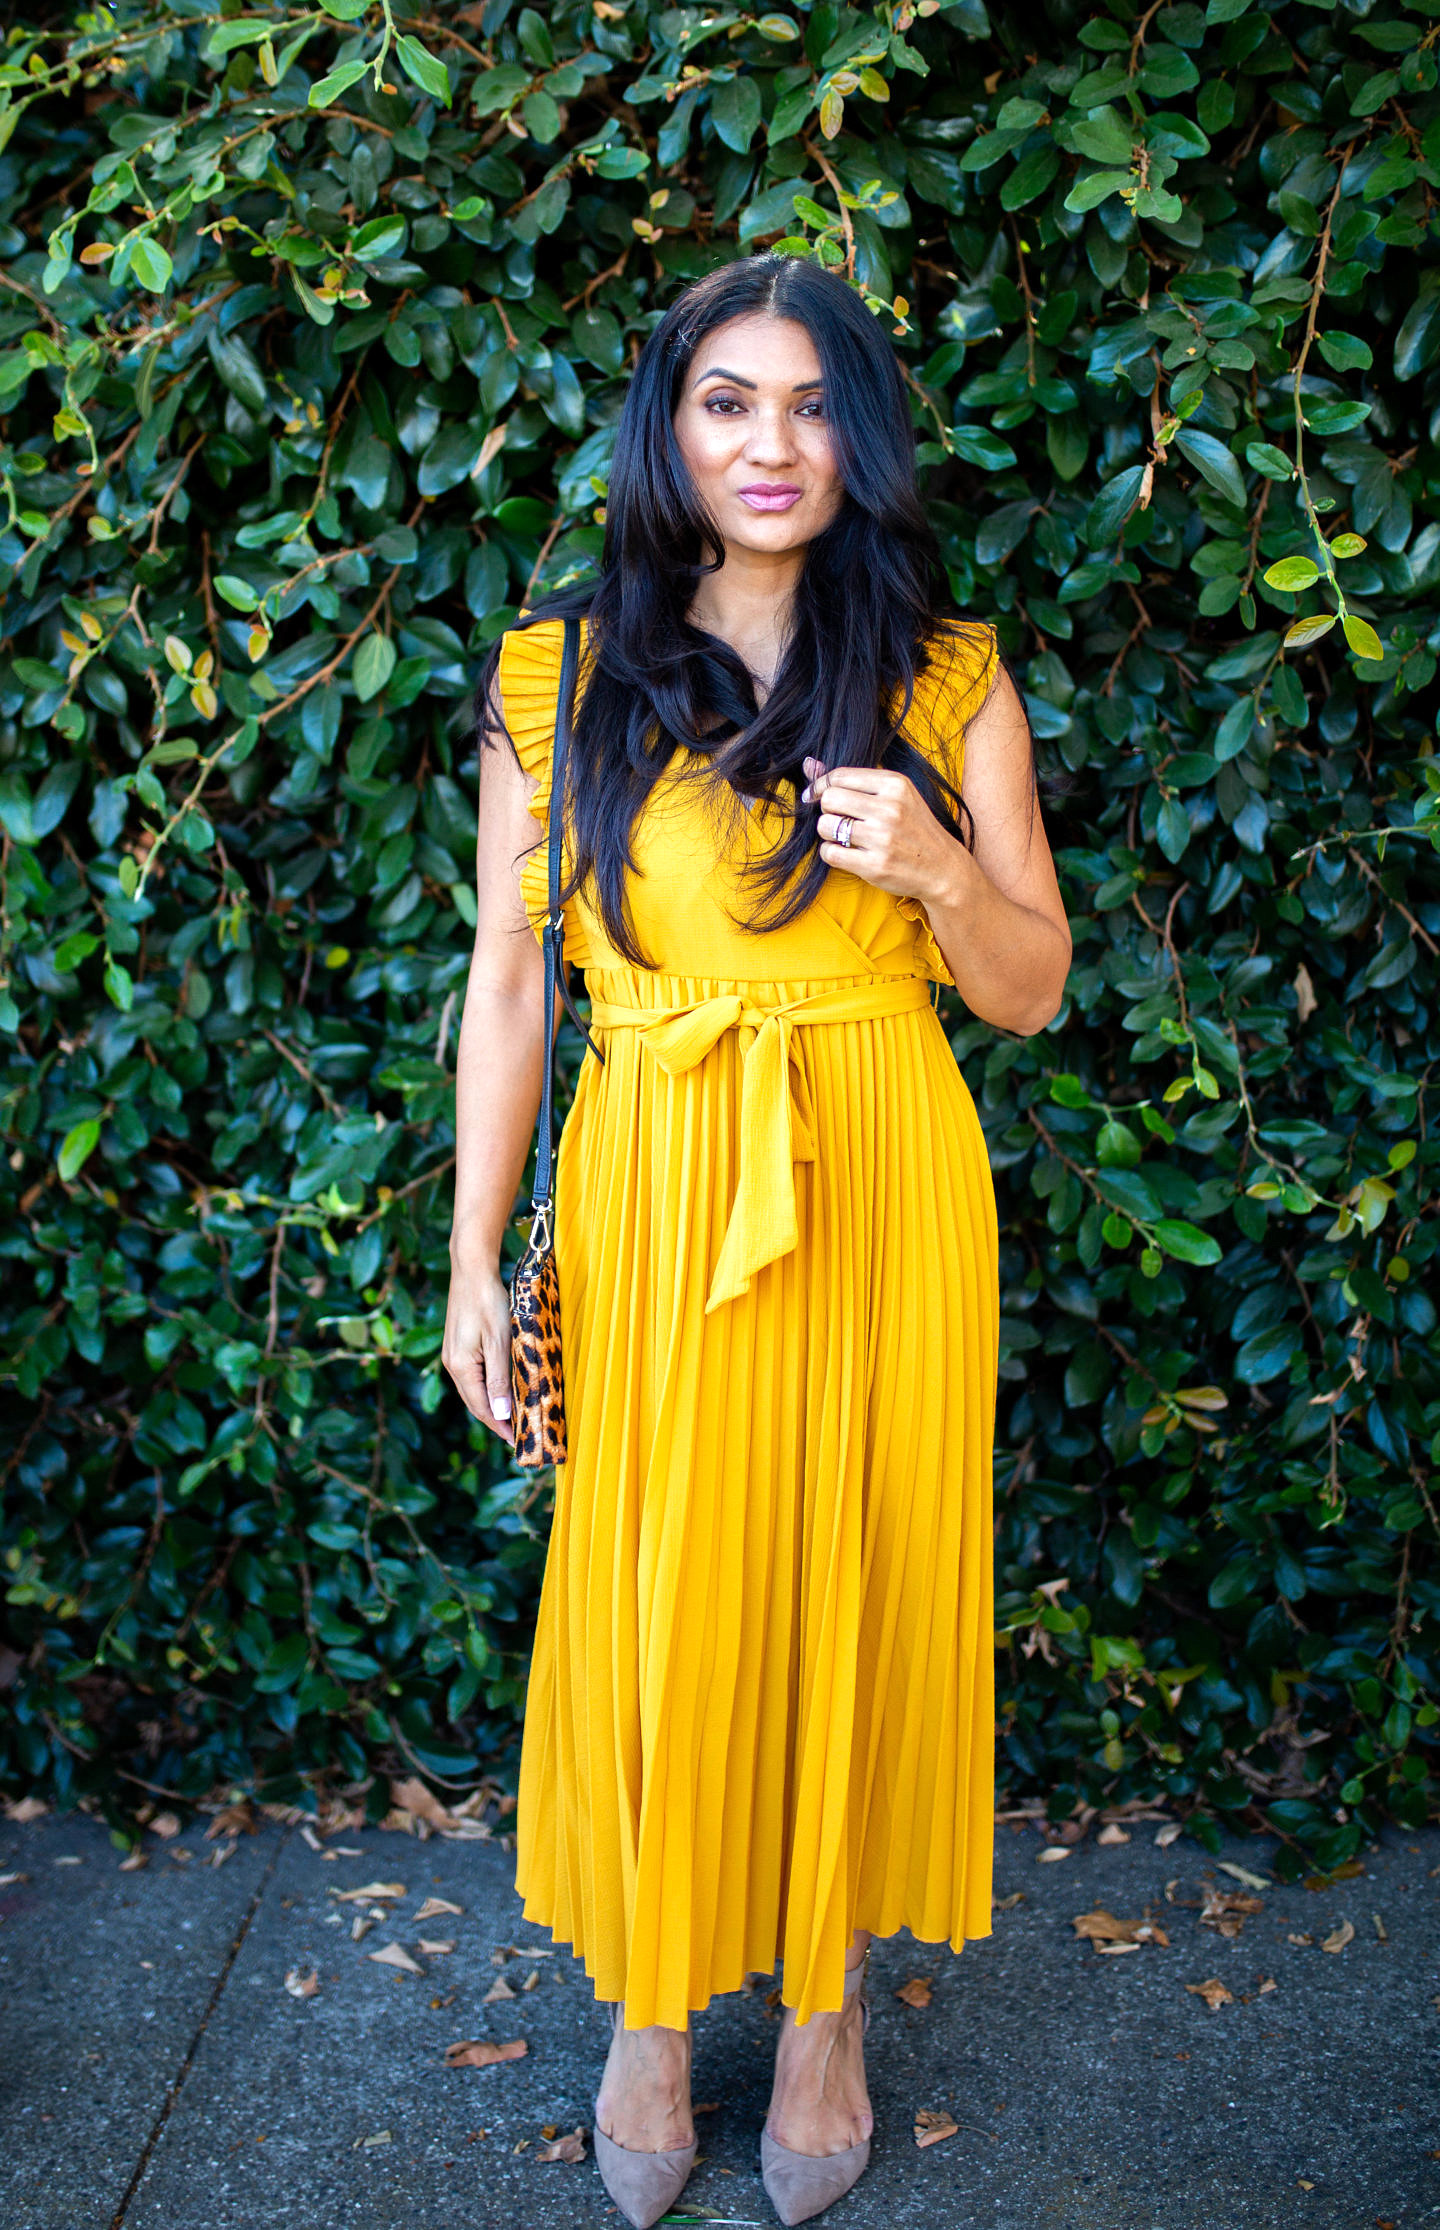 Bookmark this post ASAP if you have wanted to style a yellow pleated dress this holiday season! Keep reading as Orange County Blogger Debbie Savage share her favorite way to style a yellow pleated dress like a pro. 